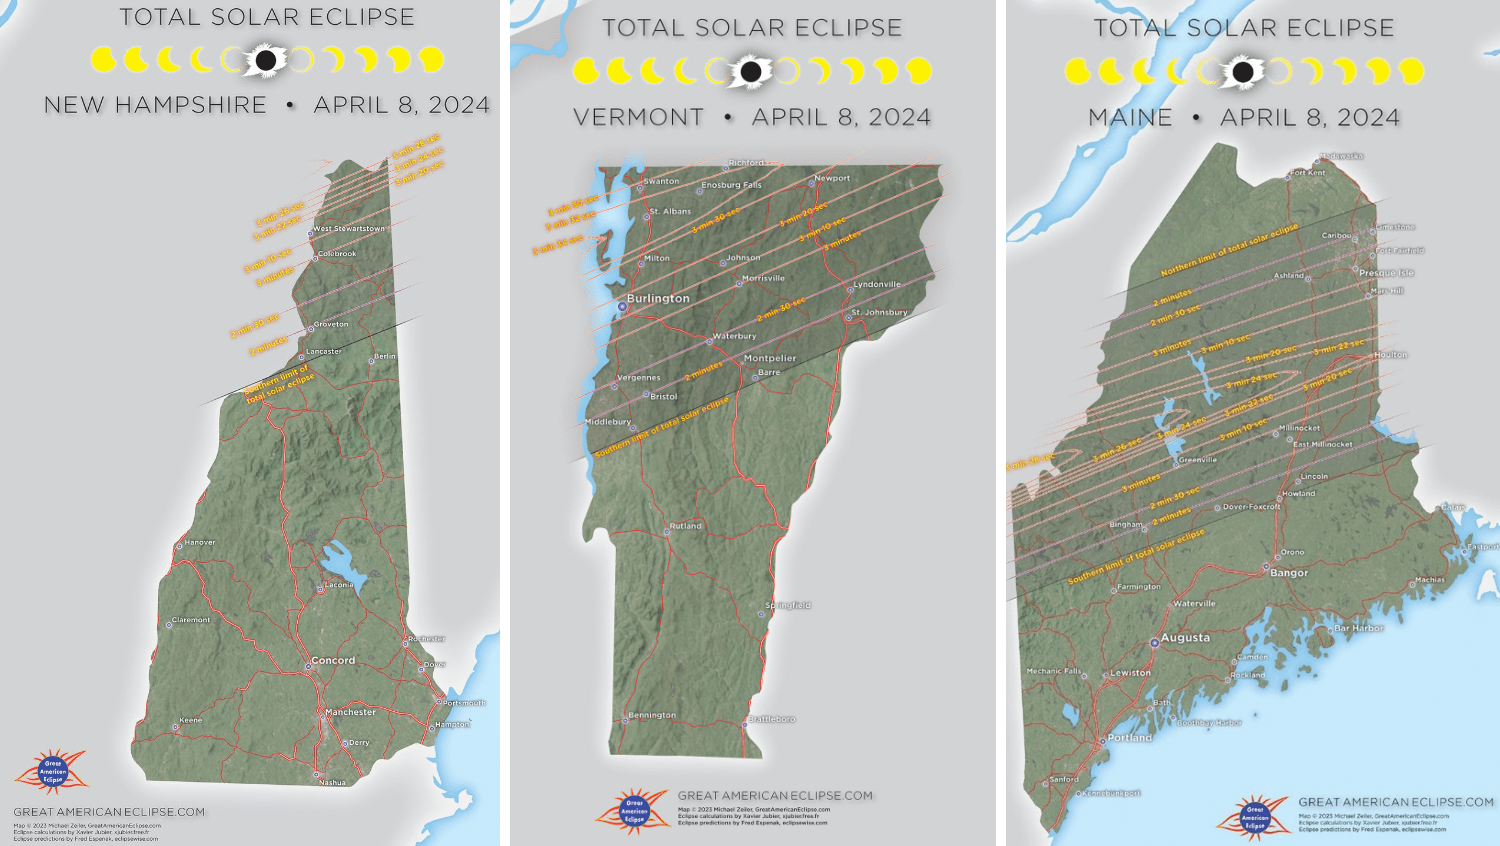 A map showing the expected total solar eclipse's path through New Hampshire, Vermont and Maine on Monday, April 8, 2024.